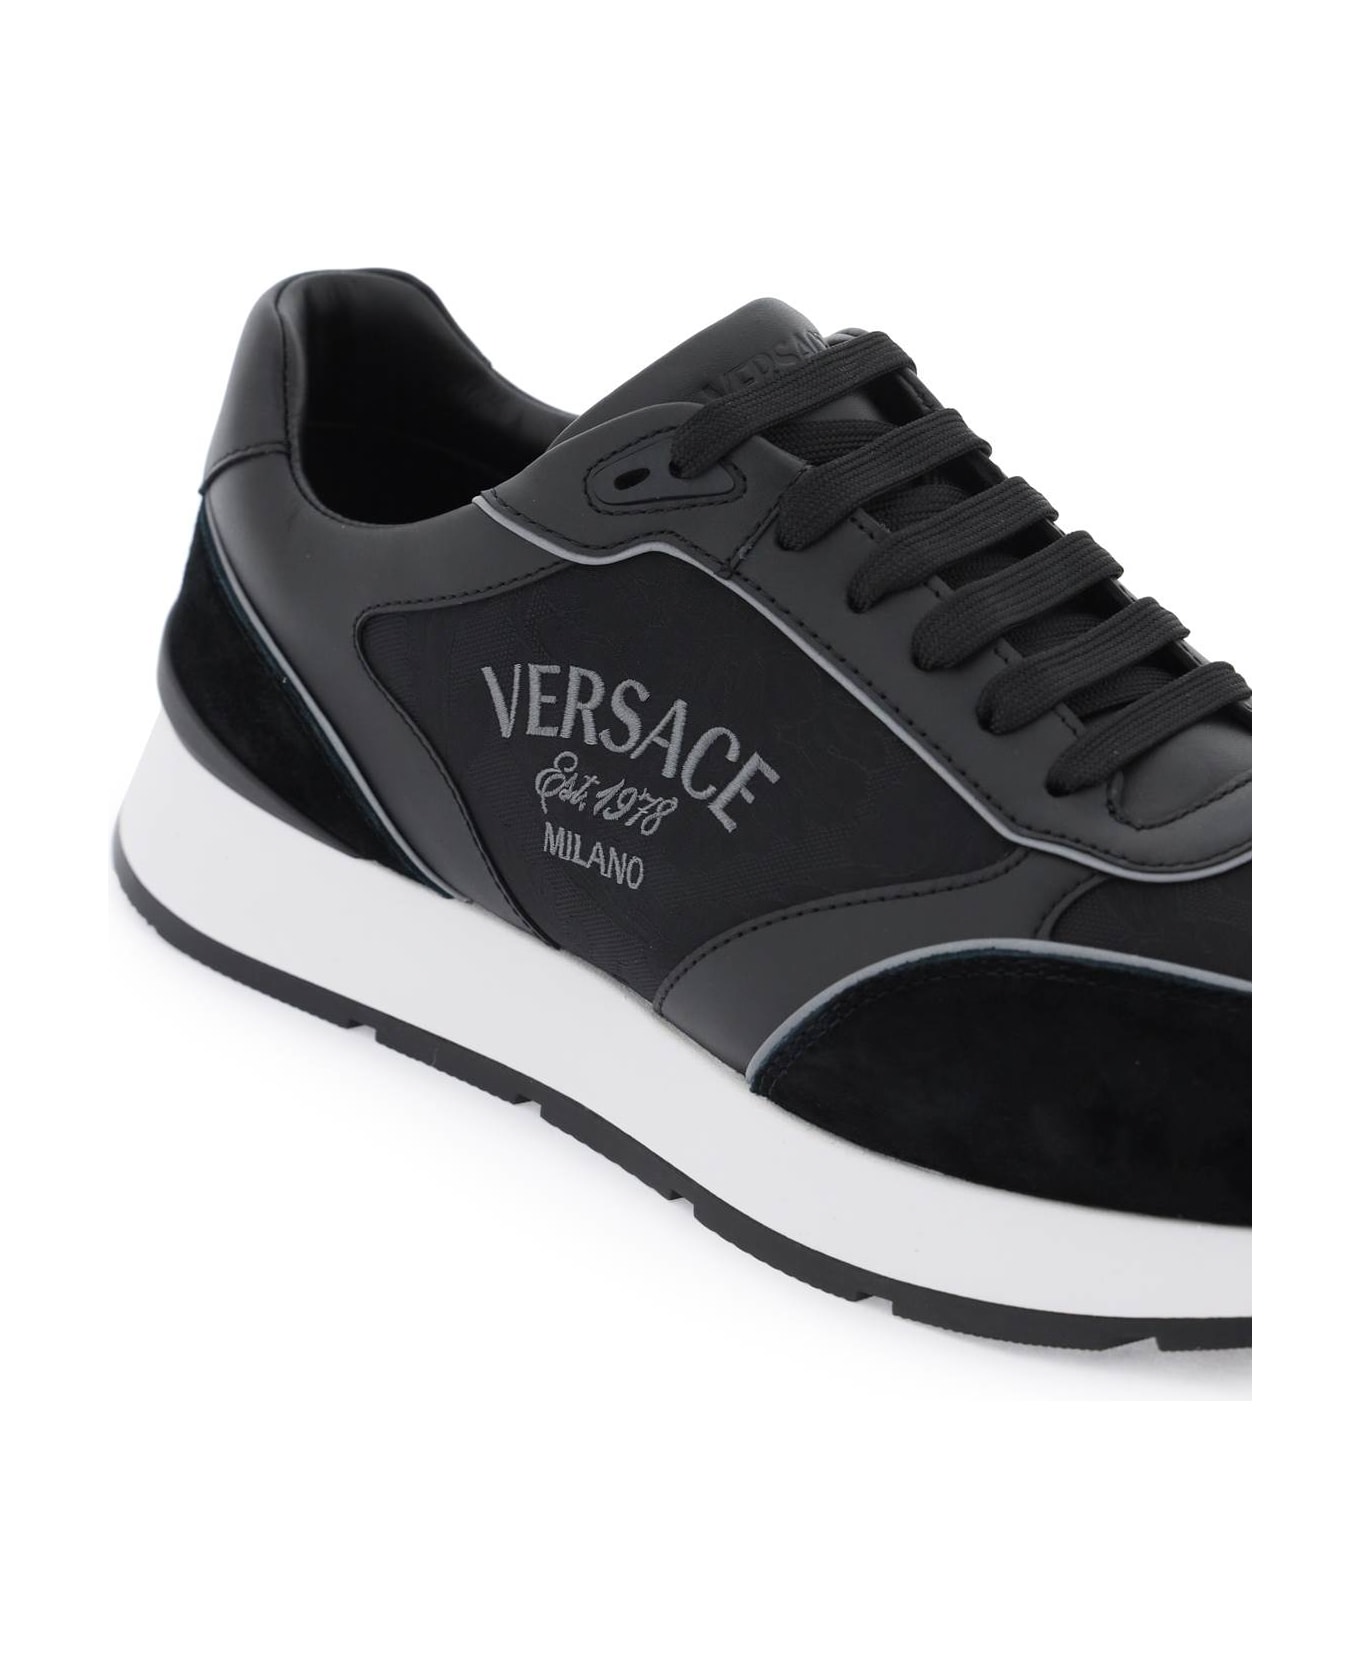 Versace Milano Round-toe Lace-up Sneakers - BLACK (Black)